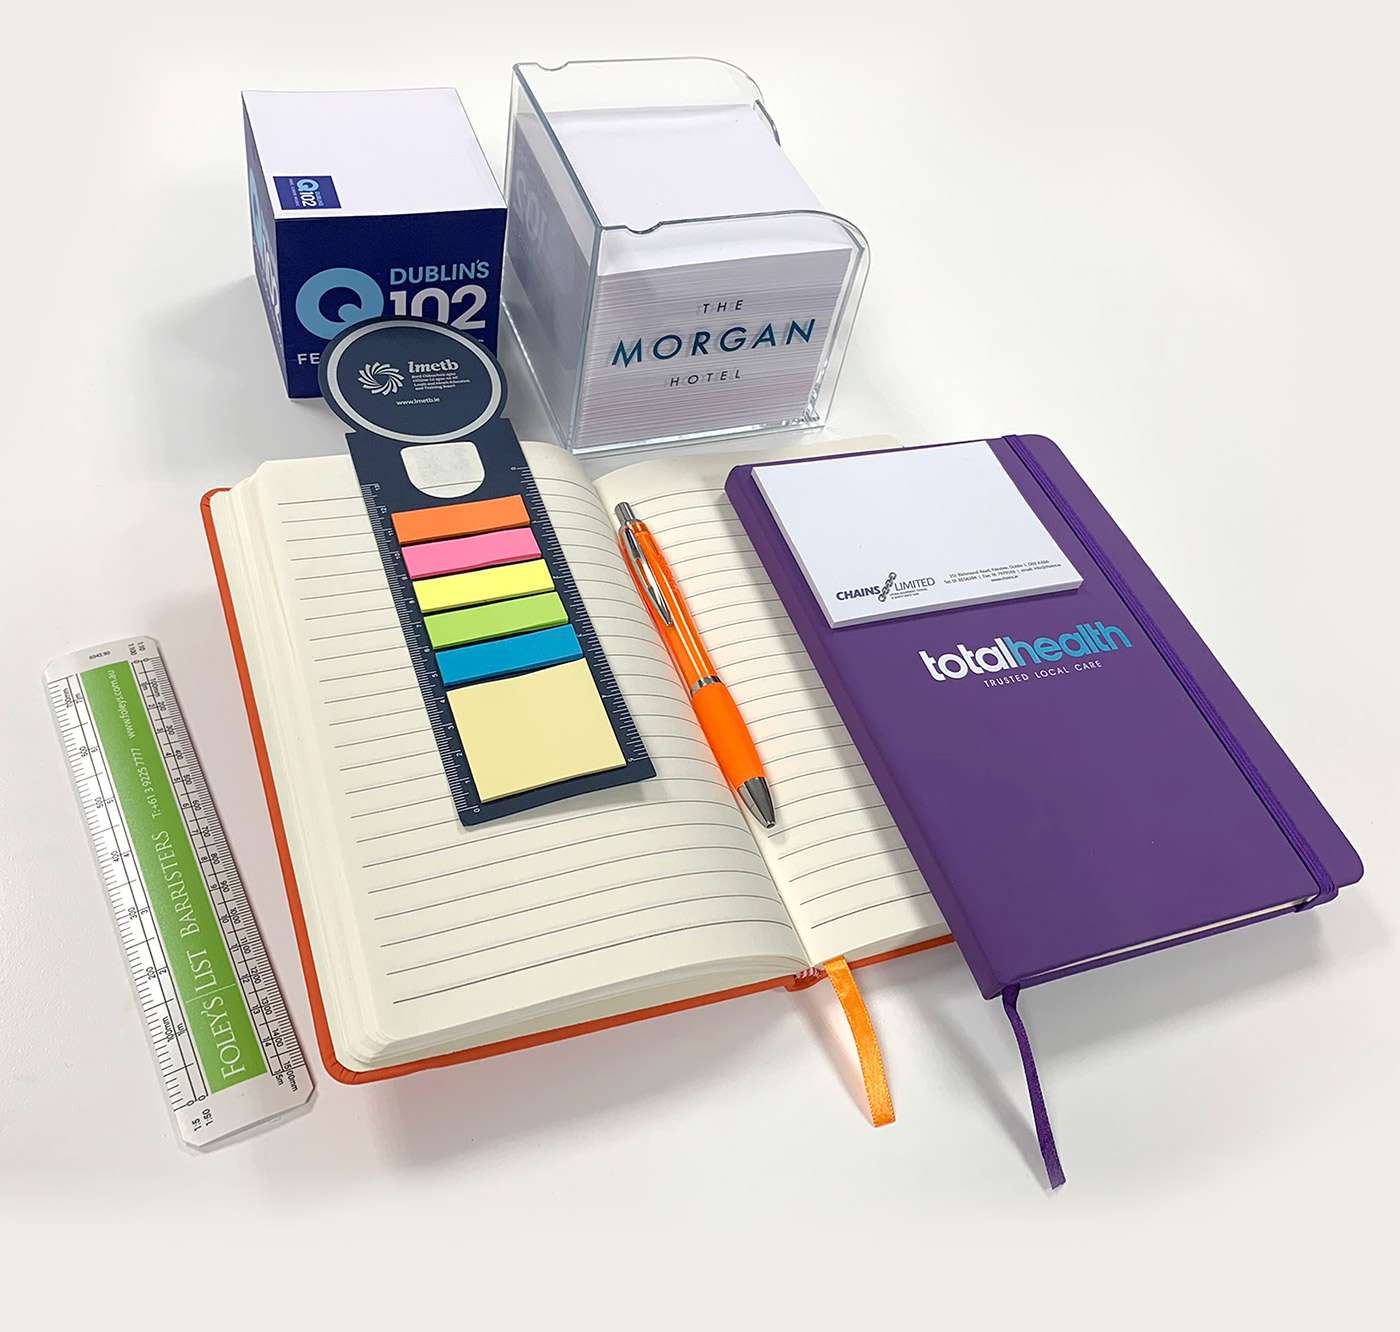 Promotional Notebooks, Note pads and pens